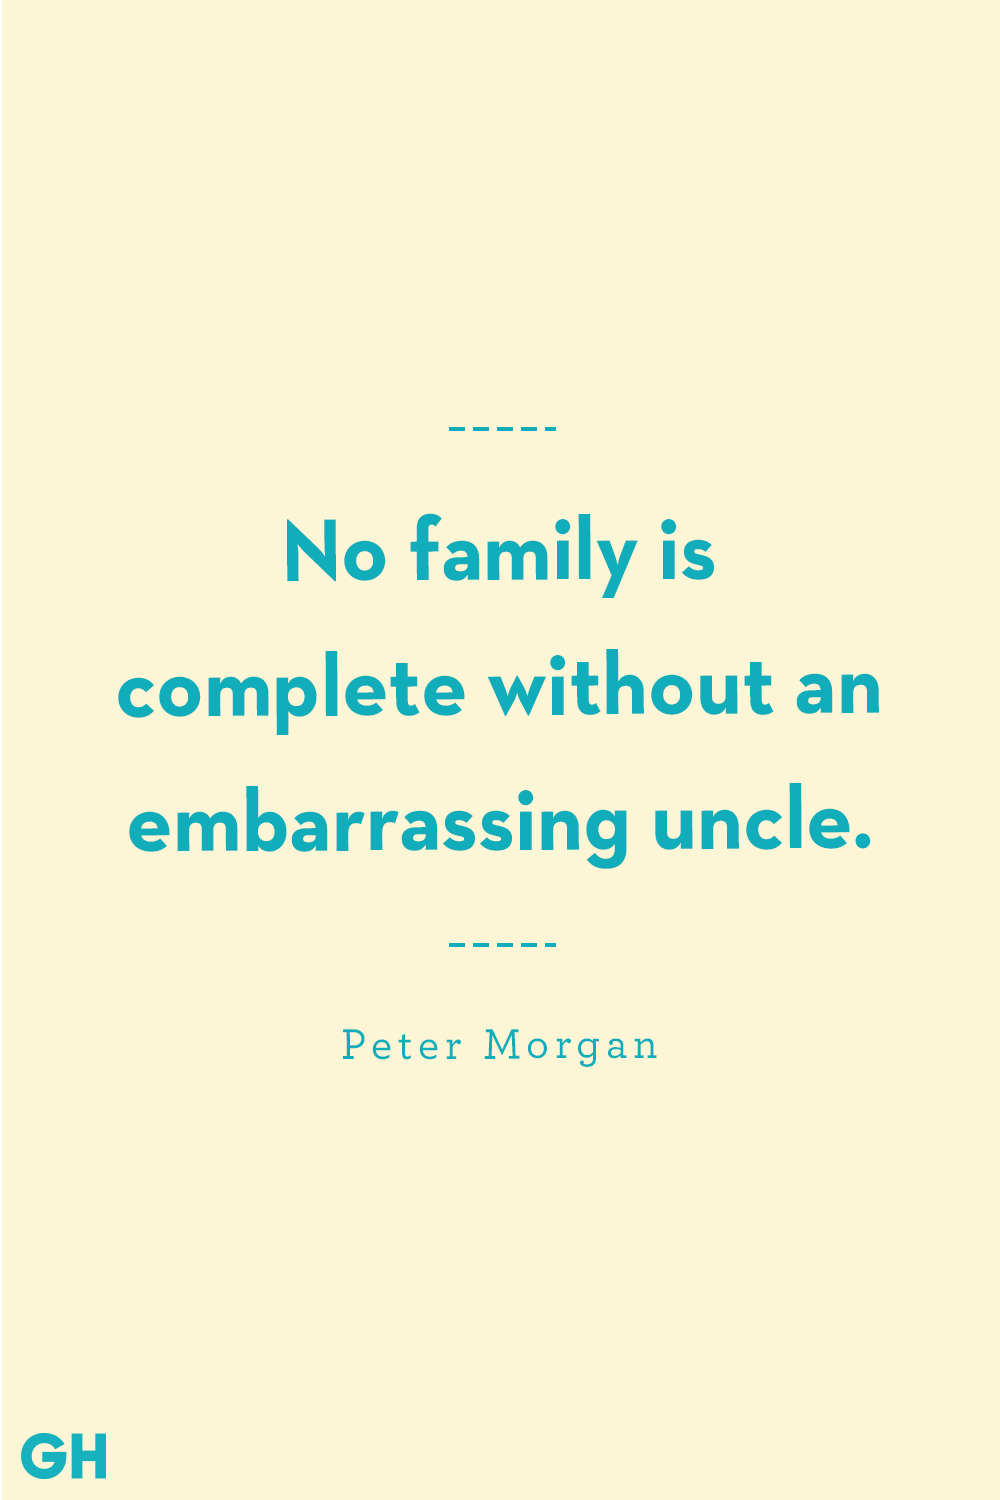 13 Greatest Uncle Quotes - Funny and Loving Quotes About Uncles